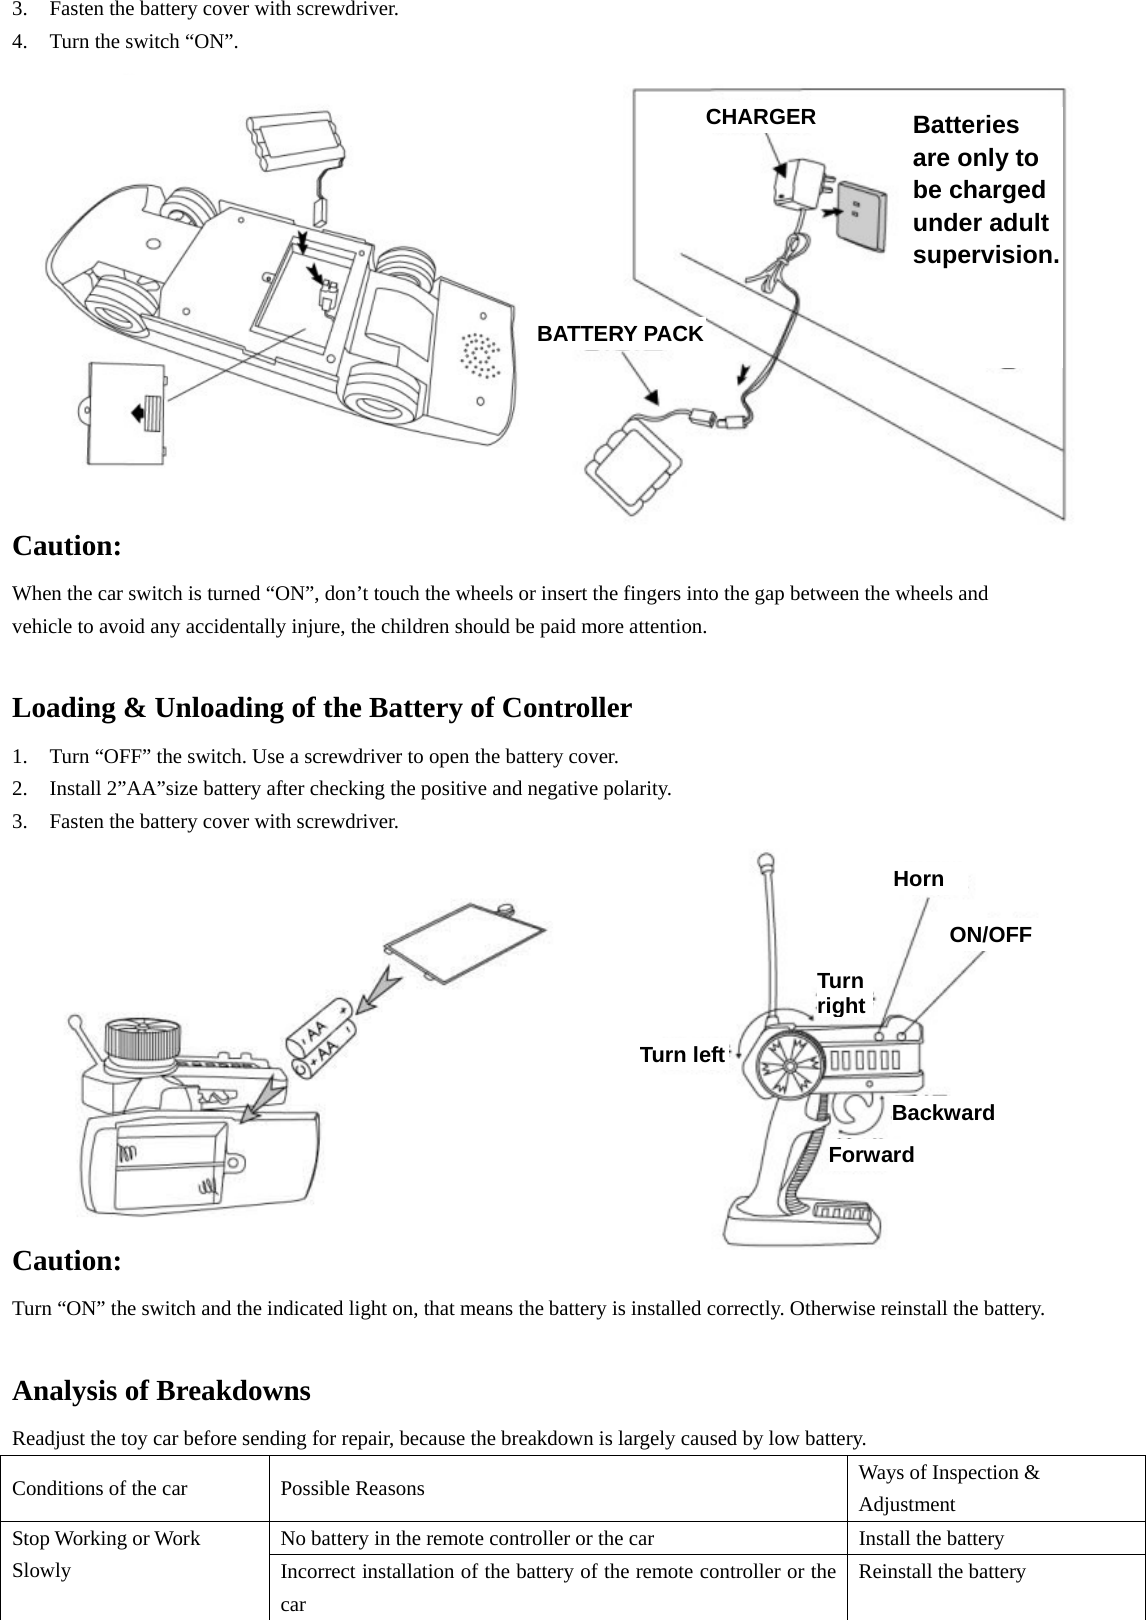 3. Fasten the battery cover with screwdriver. 4. Turn the switch “ON”.               Caution: When the car switch is turned “ON”, don’t touch the wheels or insert the fingers into the gap between the wheels and   vehicle to avoid any accidentally injure, the children should be paid more attention.  Loading &amp; Unloading of the Battery of Controller 1. Turn “OFF” the switch. Use a screwdriver to open the battery cover. 2. Install 2”AA”size battery after checking the positive and negative polarity. 3. Fasten the battery cover with screwdriver.             Caution: Turn “ON” the switch and the indicated light on, that means the battery is installed correctly. Otherwise reinstall the battery.  Analysis of Breakdowns Readjust the toy car before sending for repair, because the breakdown is largely caused by low battery. Conditions of the car  Possible Reasons  Ways of Inspection &amp; Adjustment No battery in the remote controller or the car  Install the battery Stop Working or Work Slowly  Incorrect installation of the battery of the remote controller or the car Reinstall the battery BATTERY PACKCHARGER BATTERY PACK Batteries are only to be charged under adult supervision.ON/OFFBackward Forward Turn leftTurn right Horn 